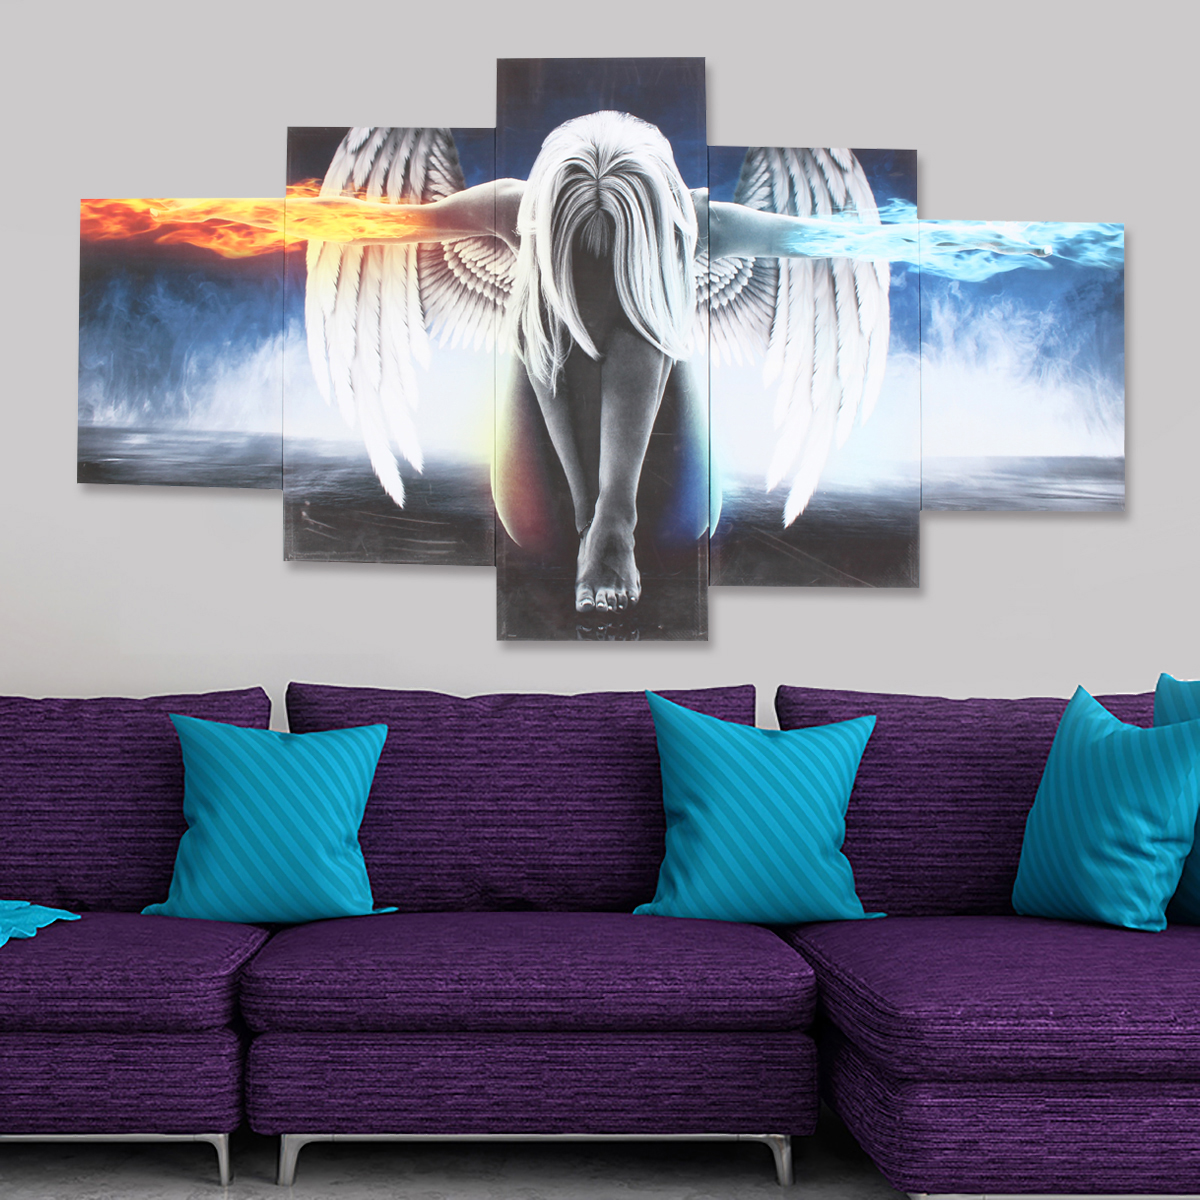 5PCS-Angel-Canvas-Print-Painting-Modern-Art-Wall-Picture-Home-Decor-Decoration-with-Framed-for-Home--1219145-3